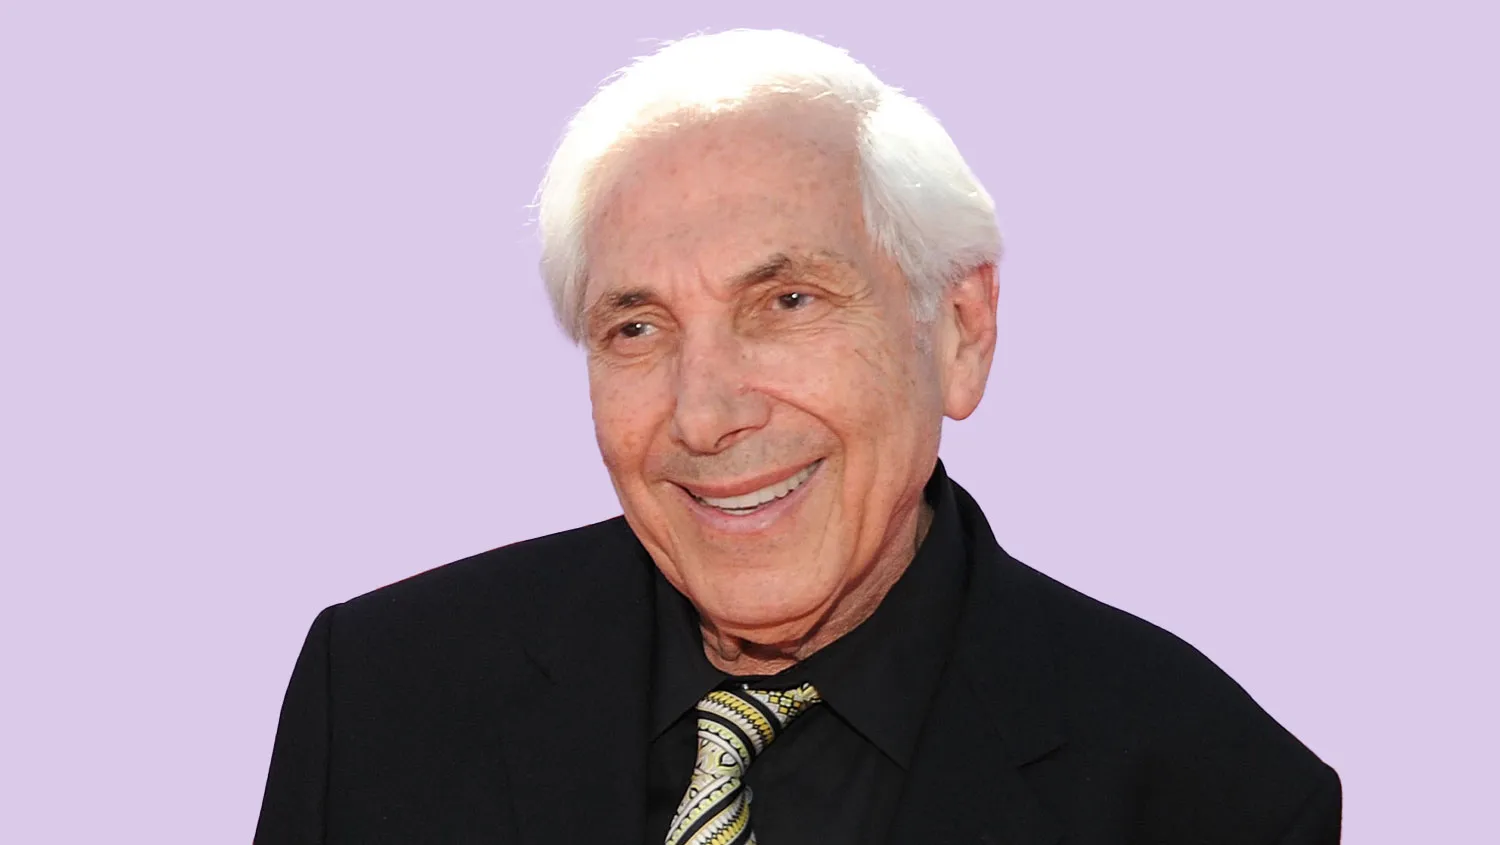  Marty Krofft